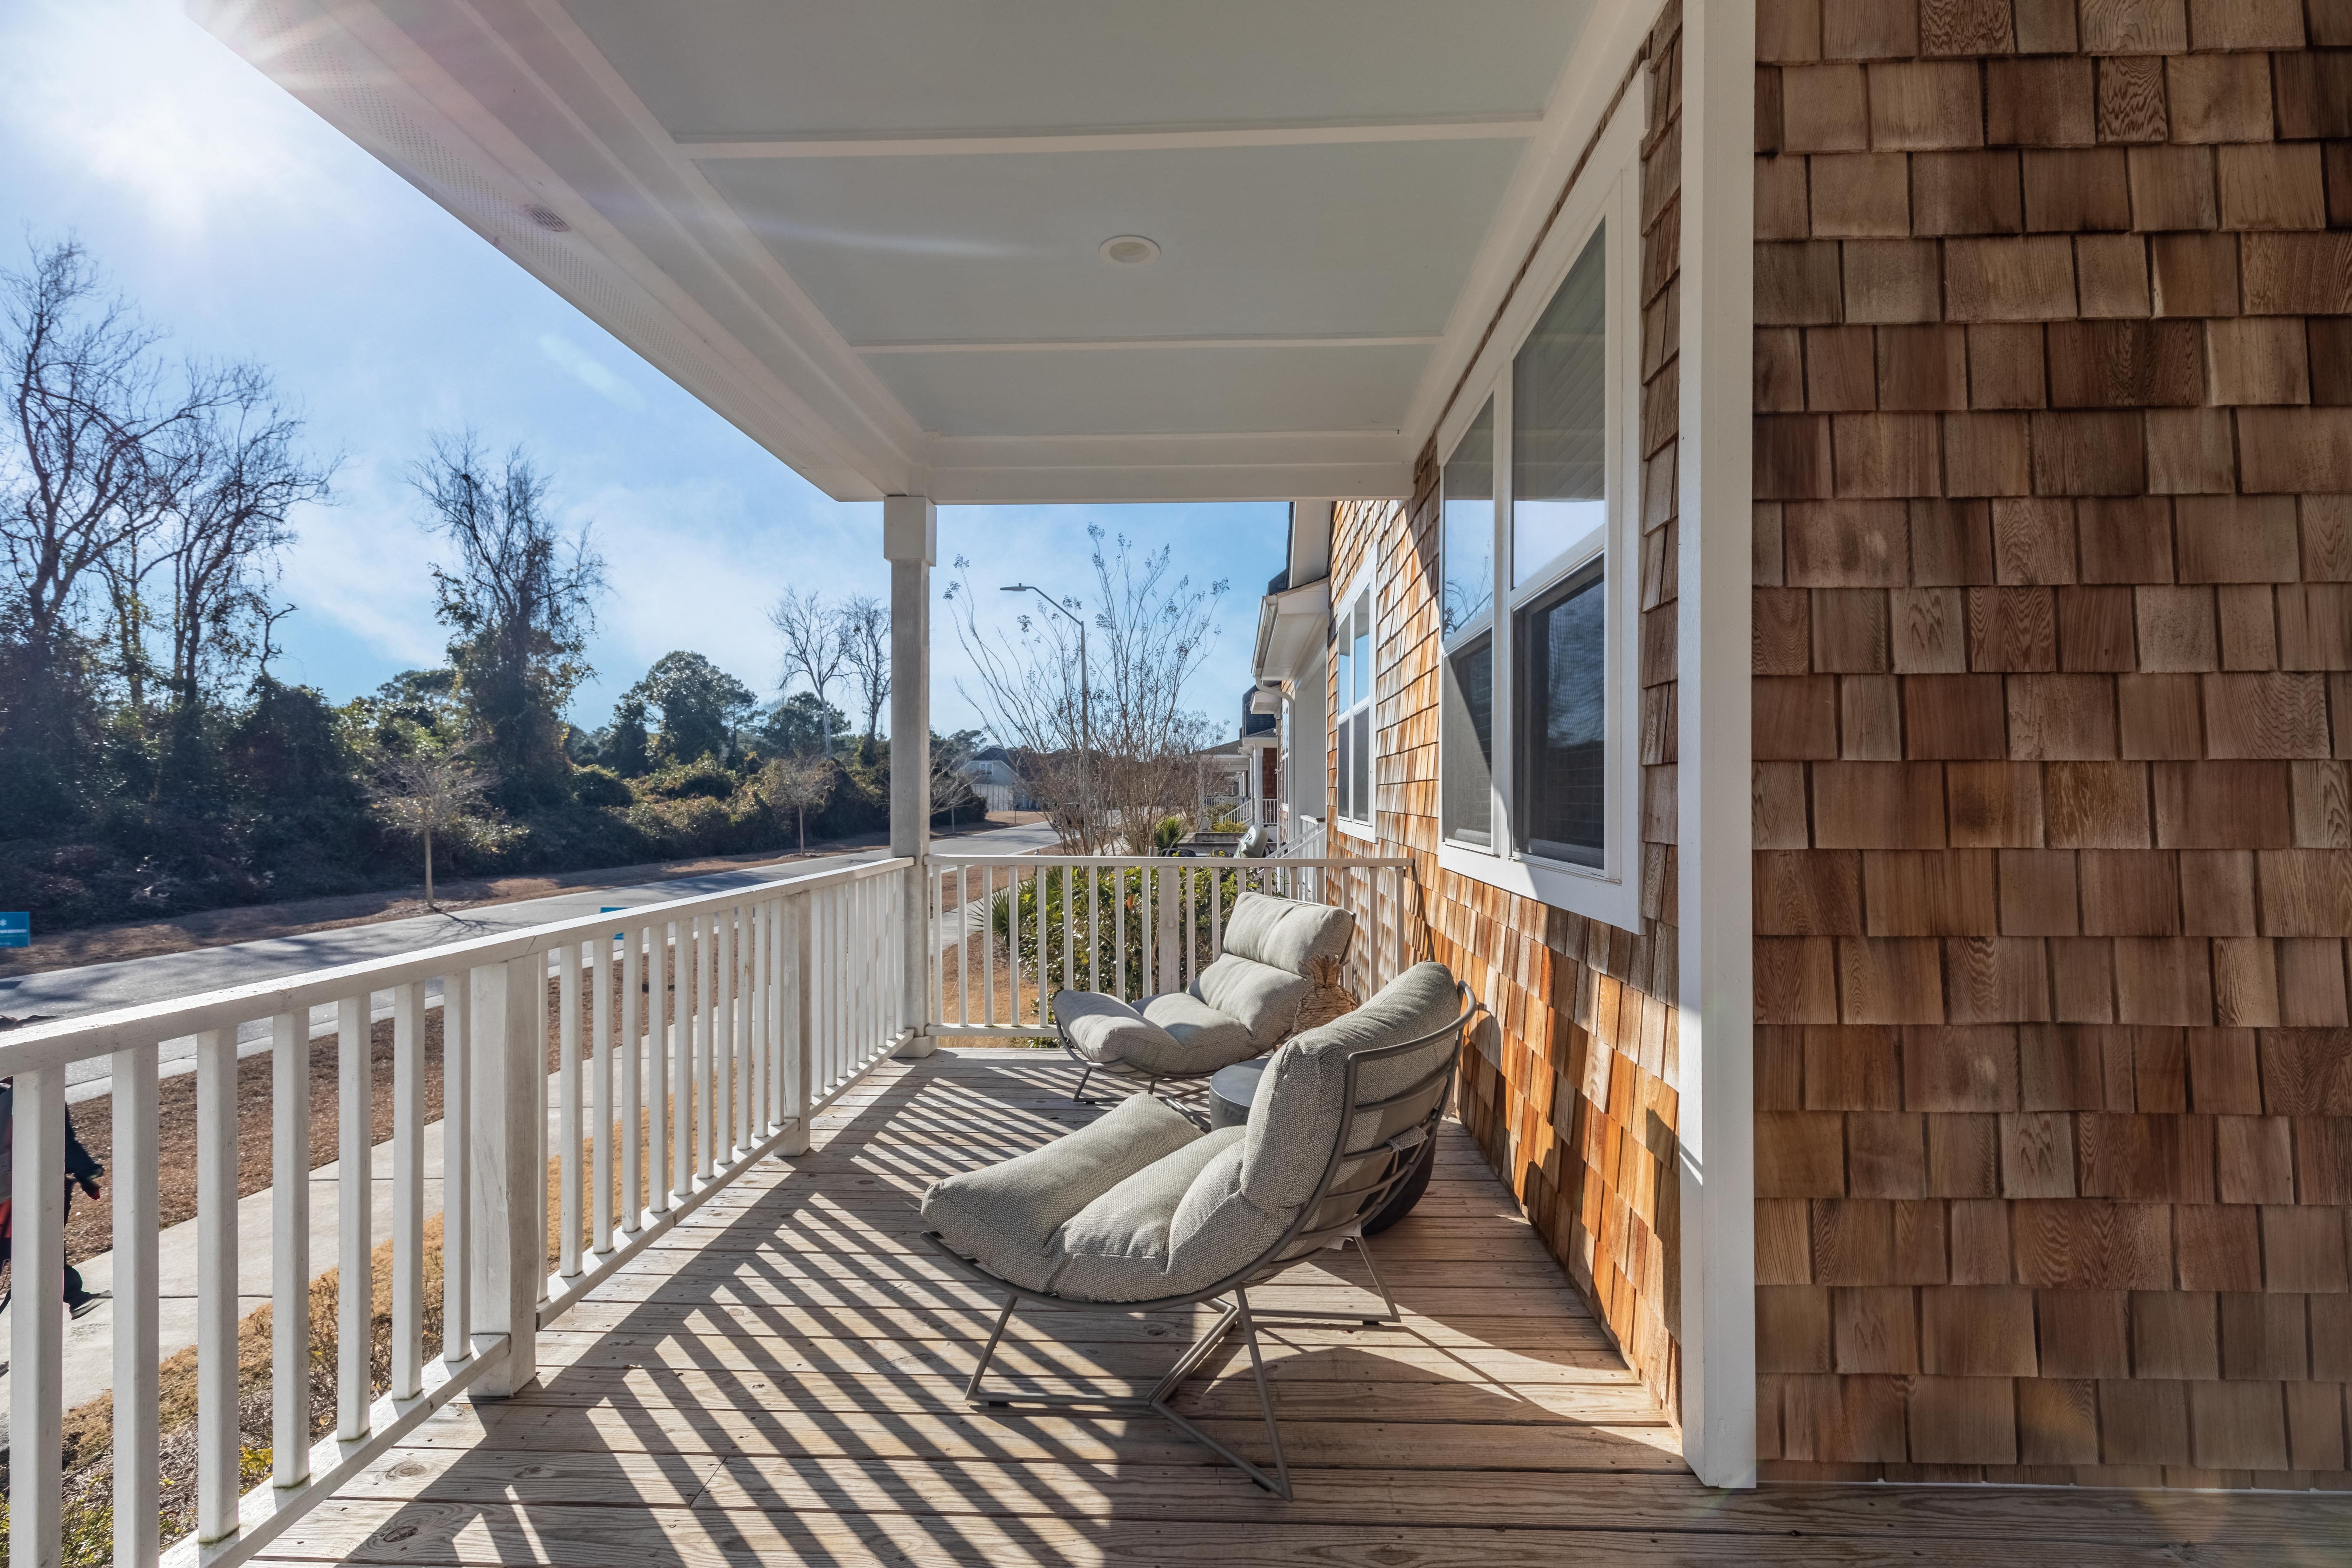 Wilmington NC Apartments - Myrtle Landing - Front Porch with Wood-Style Flooring Surrounded by a White Wooden Fence